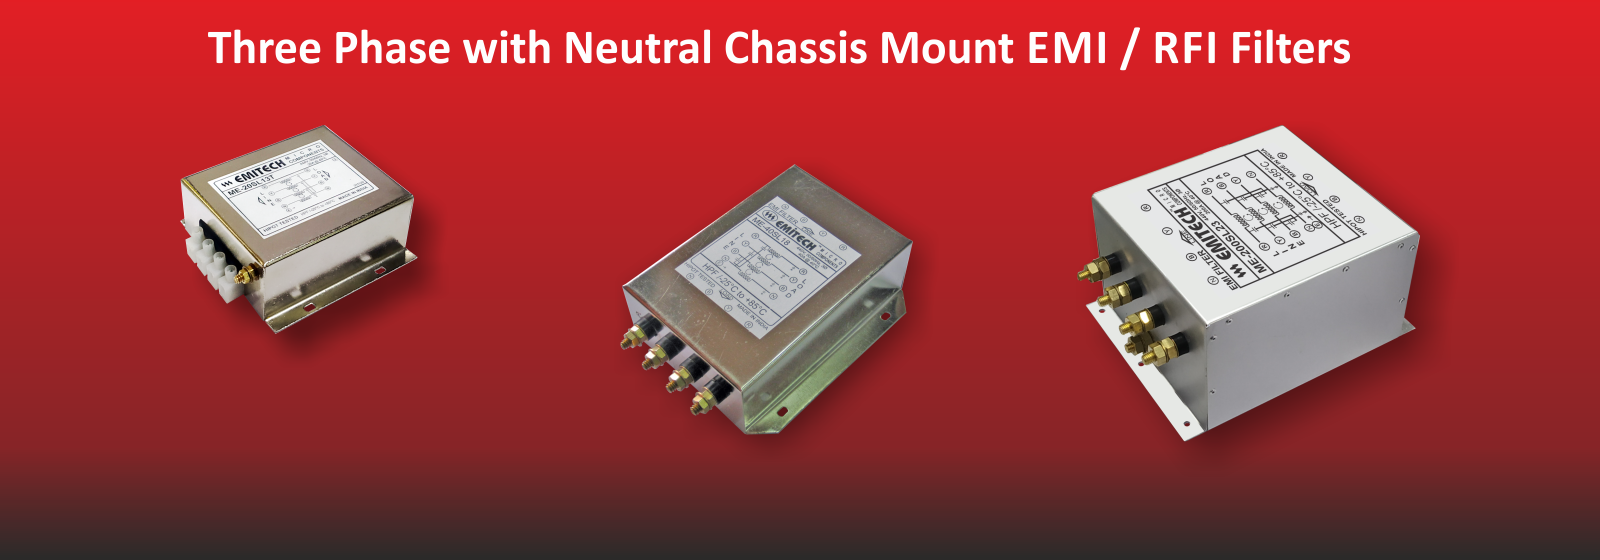 Three Phase with neutral Chassis Mount EMI Filter